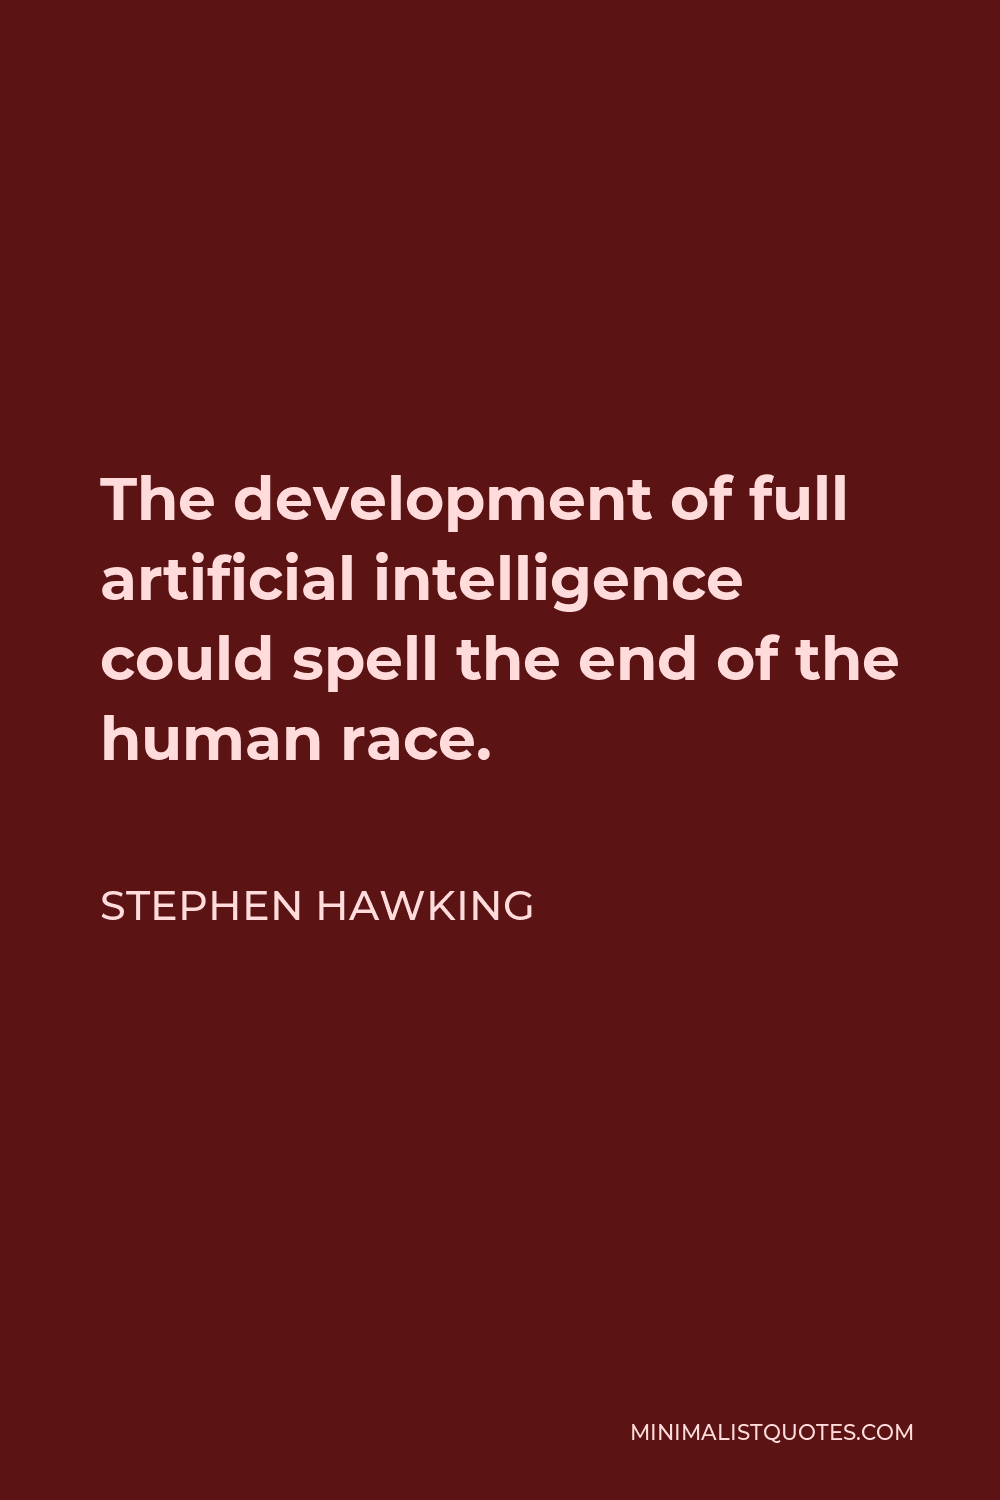 Stephen Hawking Quote - The development of full artificial intelligence could spell the end of the human race.